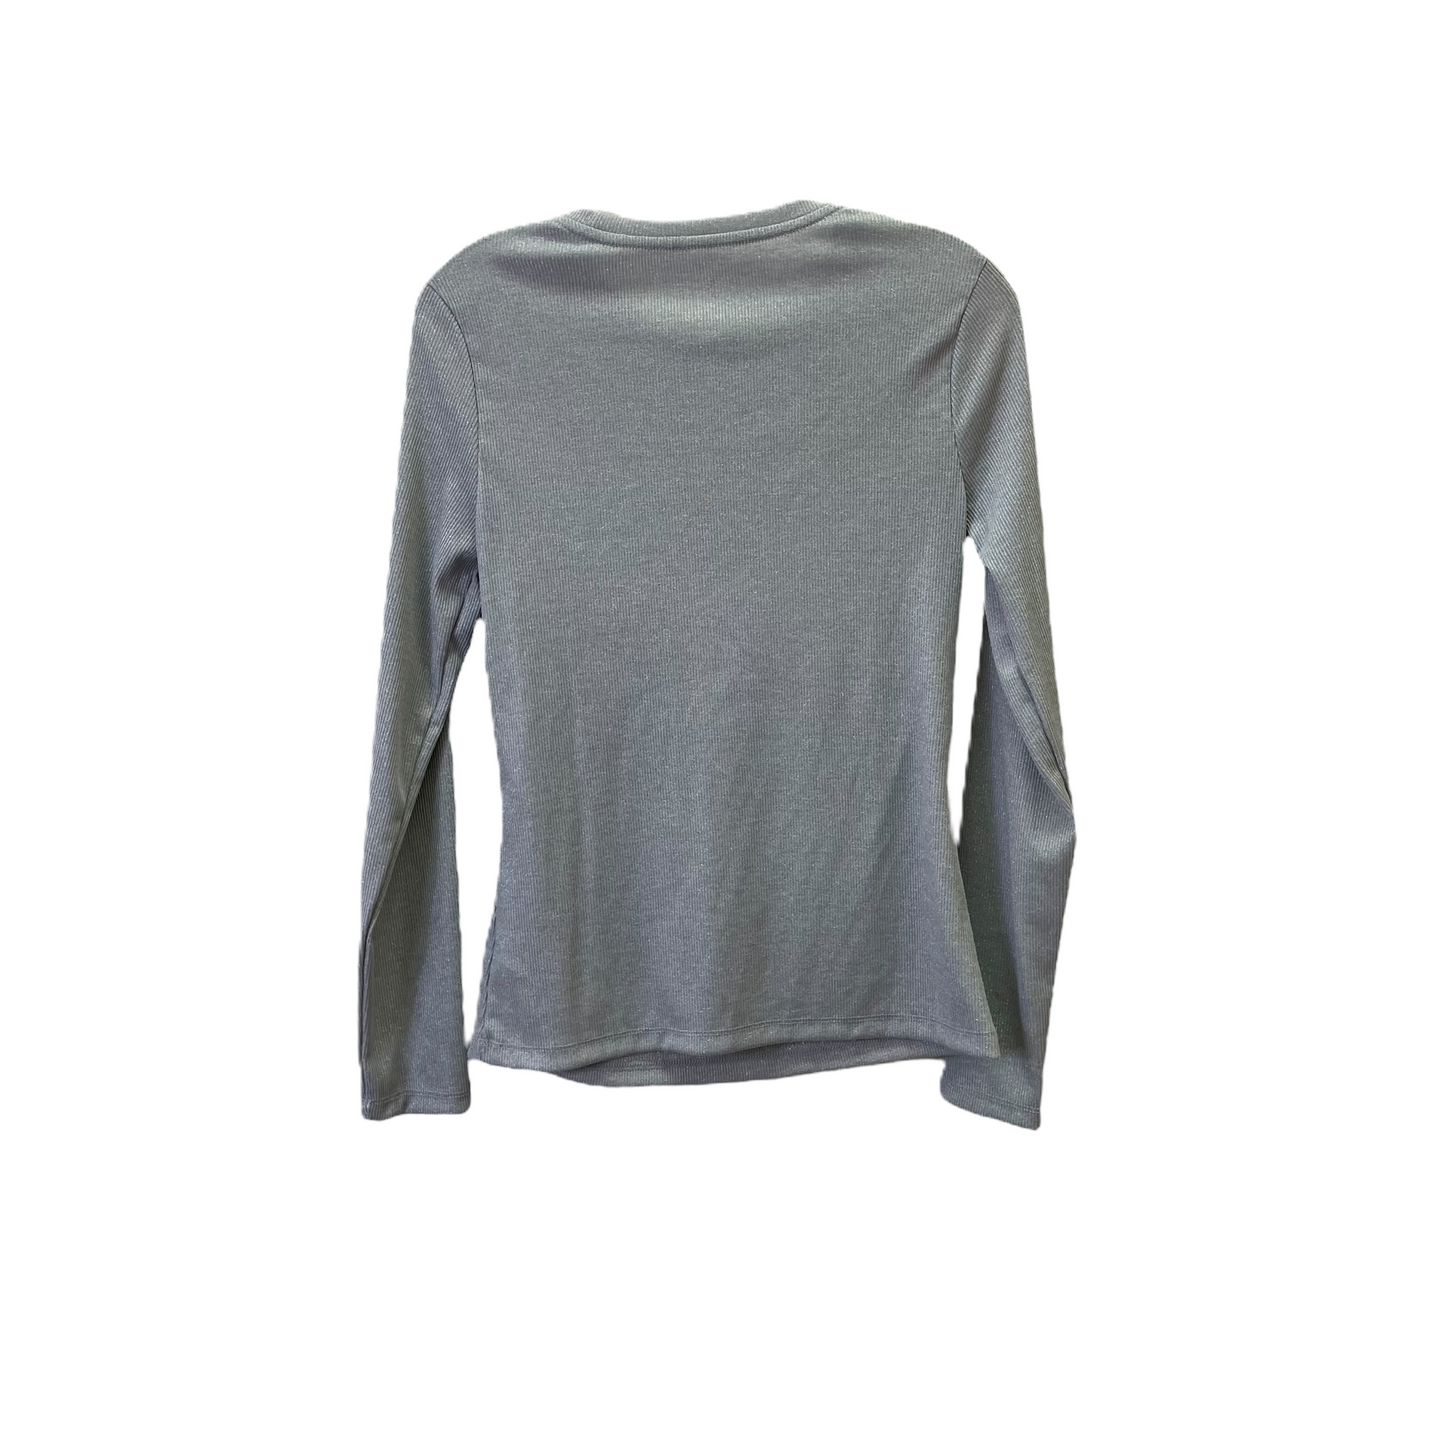 Silver Top Long Sleeve Basic By A New Day, Size: M